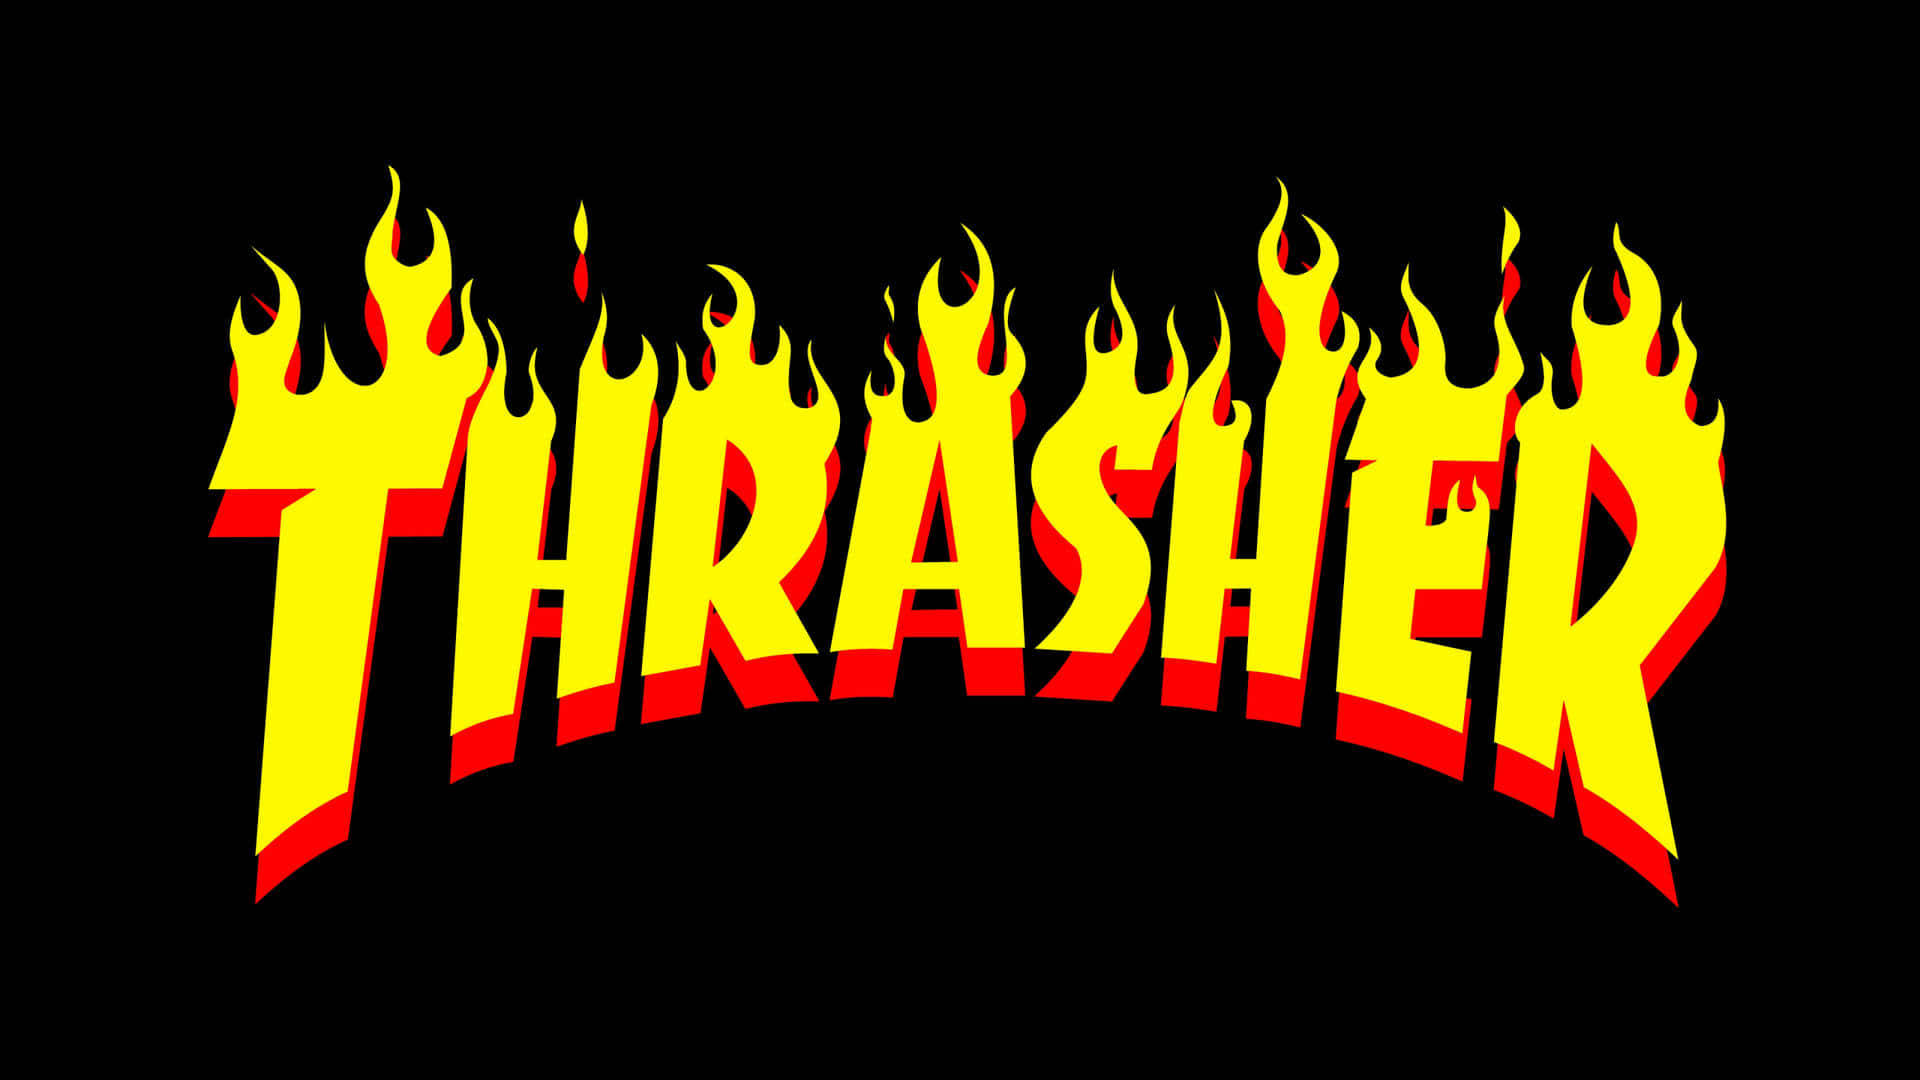 Download Thrasher Pictures | Wallpapers.com